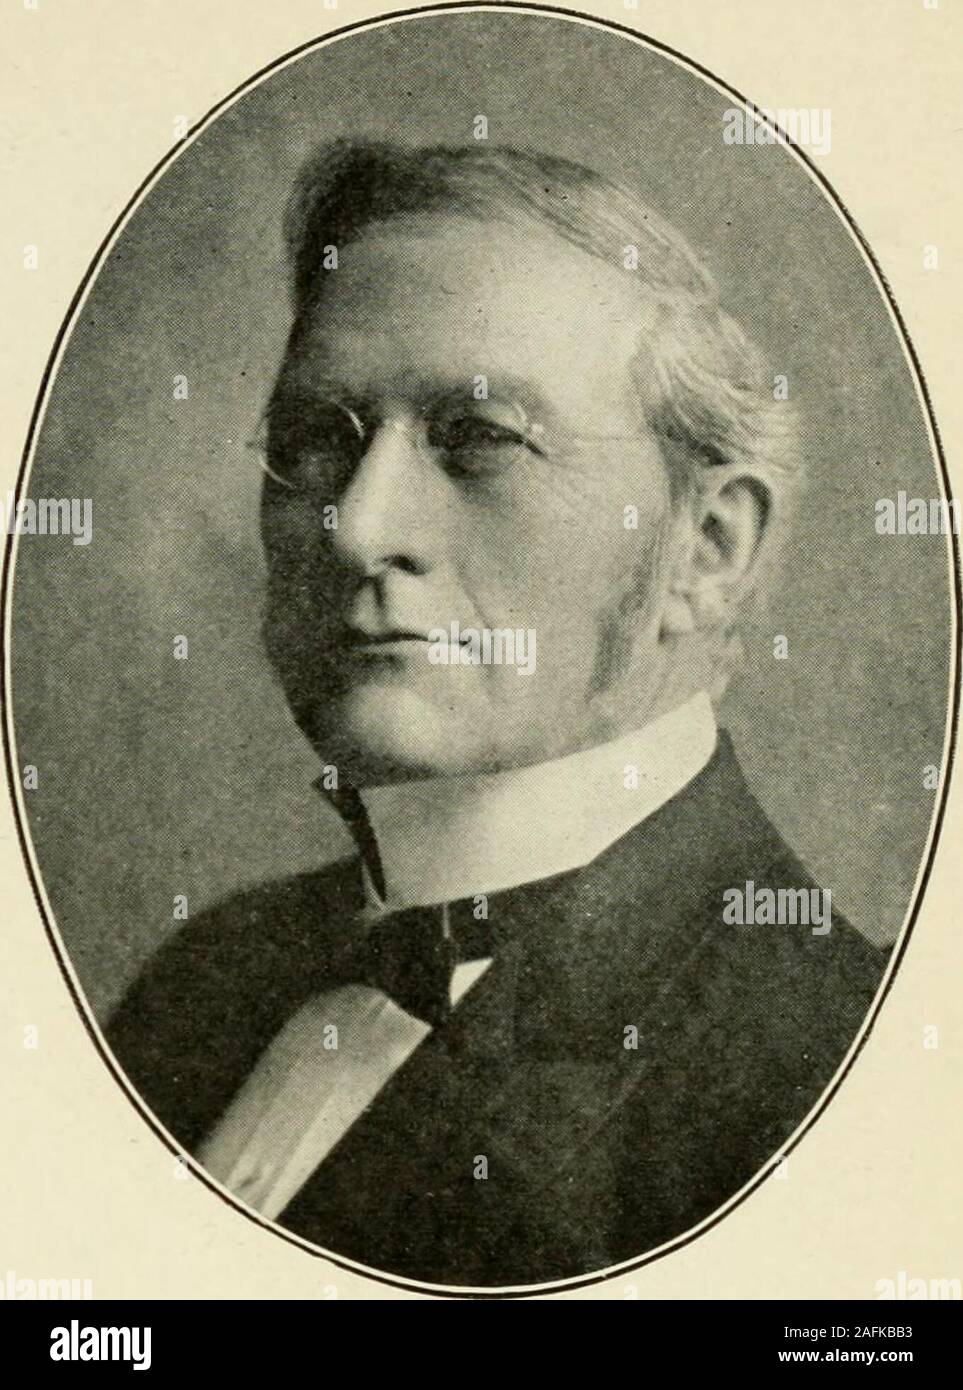 . Men of Minnesota; a collection of the portraits of men prominent in business and professional life in Minnesota. ULYSSES G. WILLIAMS, M. D. MINNEAPOLIS.PHYSICIAN AND SURGEON. CHARLES HENRY NORRED. M. D. MINNEAPOLIS. PHYSICIAN AND surgeon; PRES. BOARD U. S. EXAMINING SURGEONS. Stock Photo